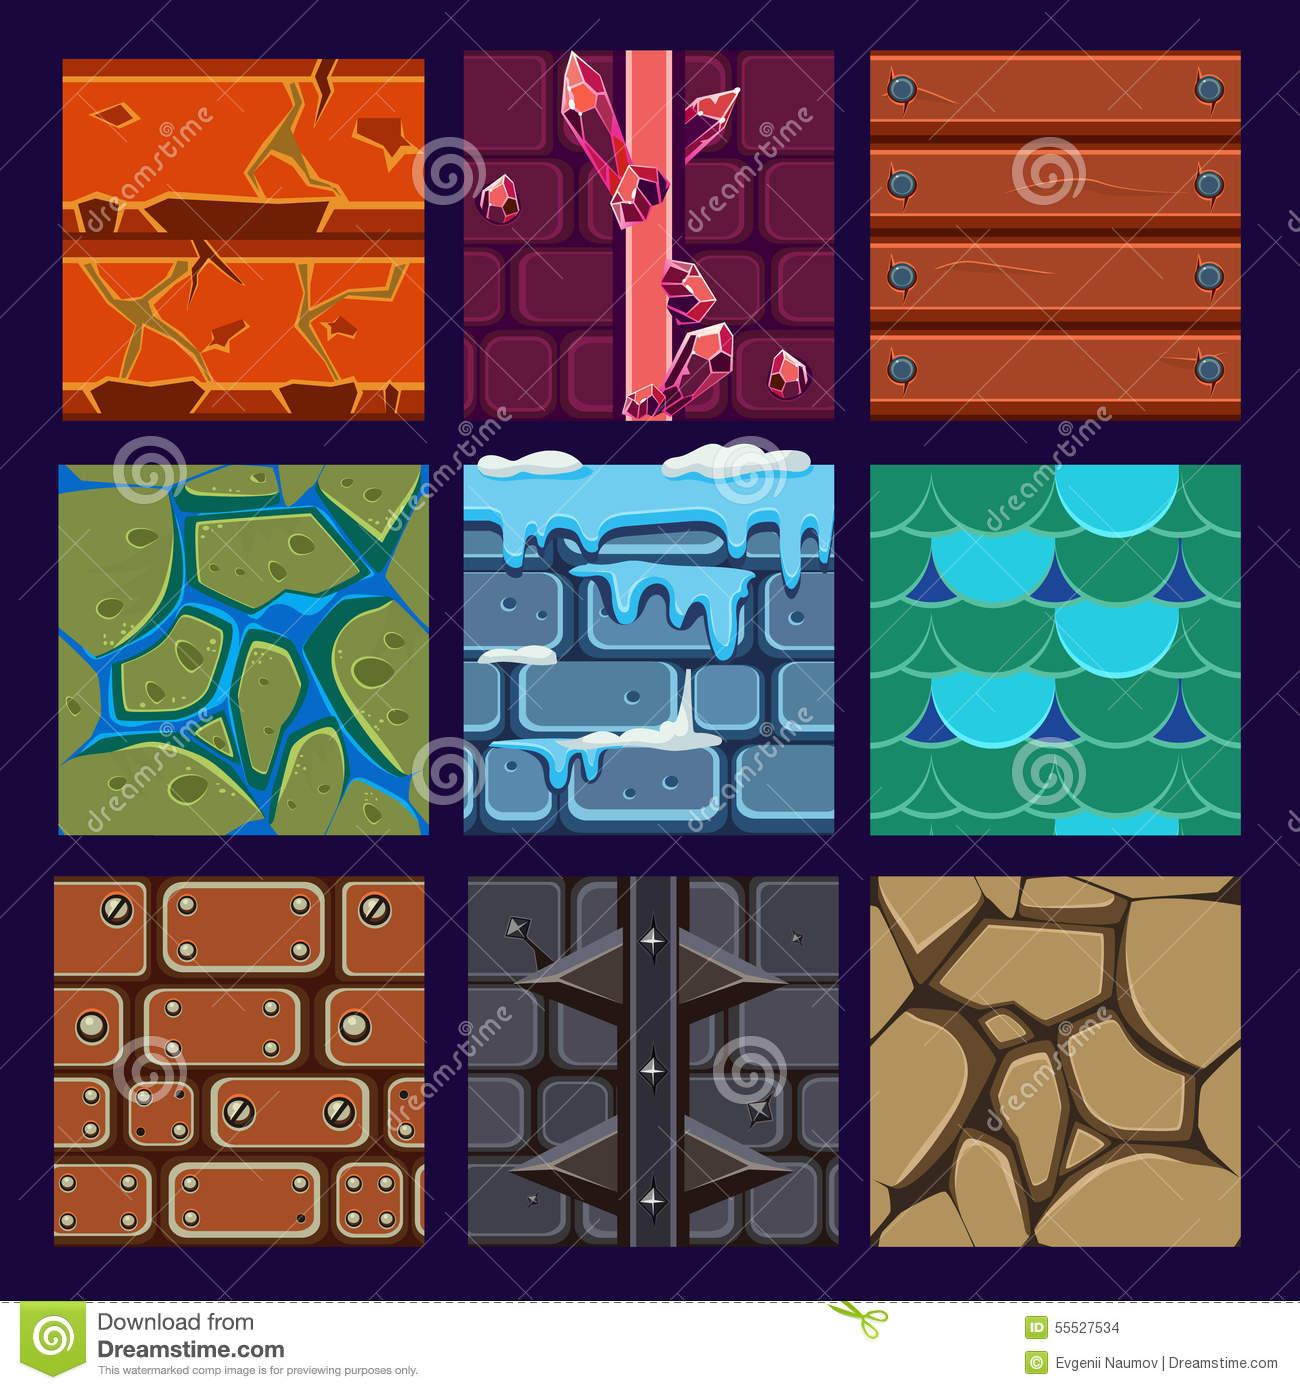 game materials and textures